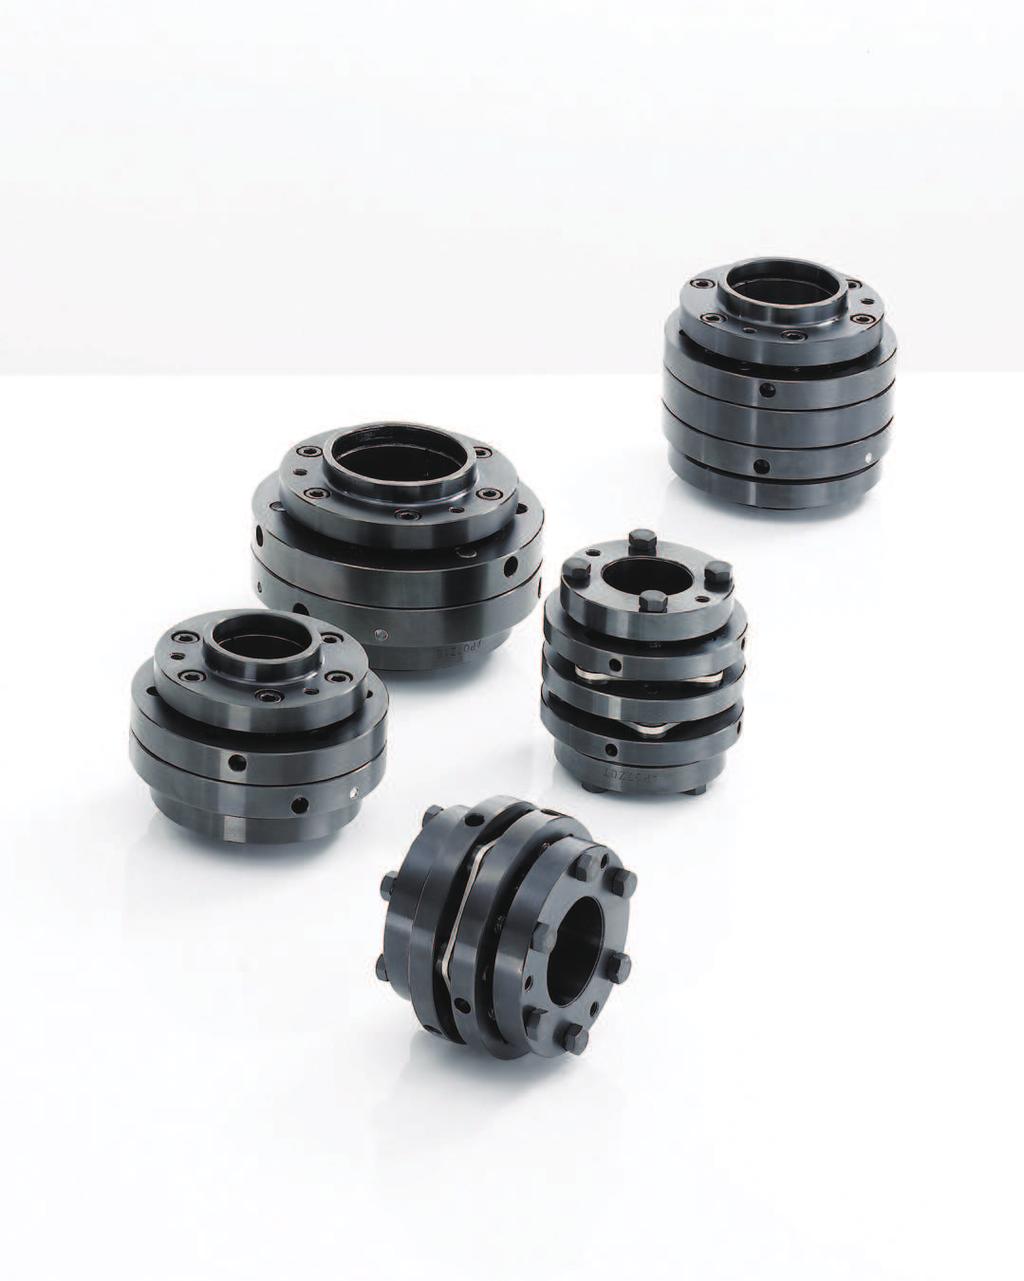 High-speed Rotation, High-precision Positioning ò The coupling specially designed for high-speed applications allows a maximum rotation speed of 2, min -1.